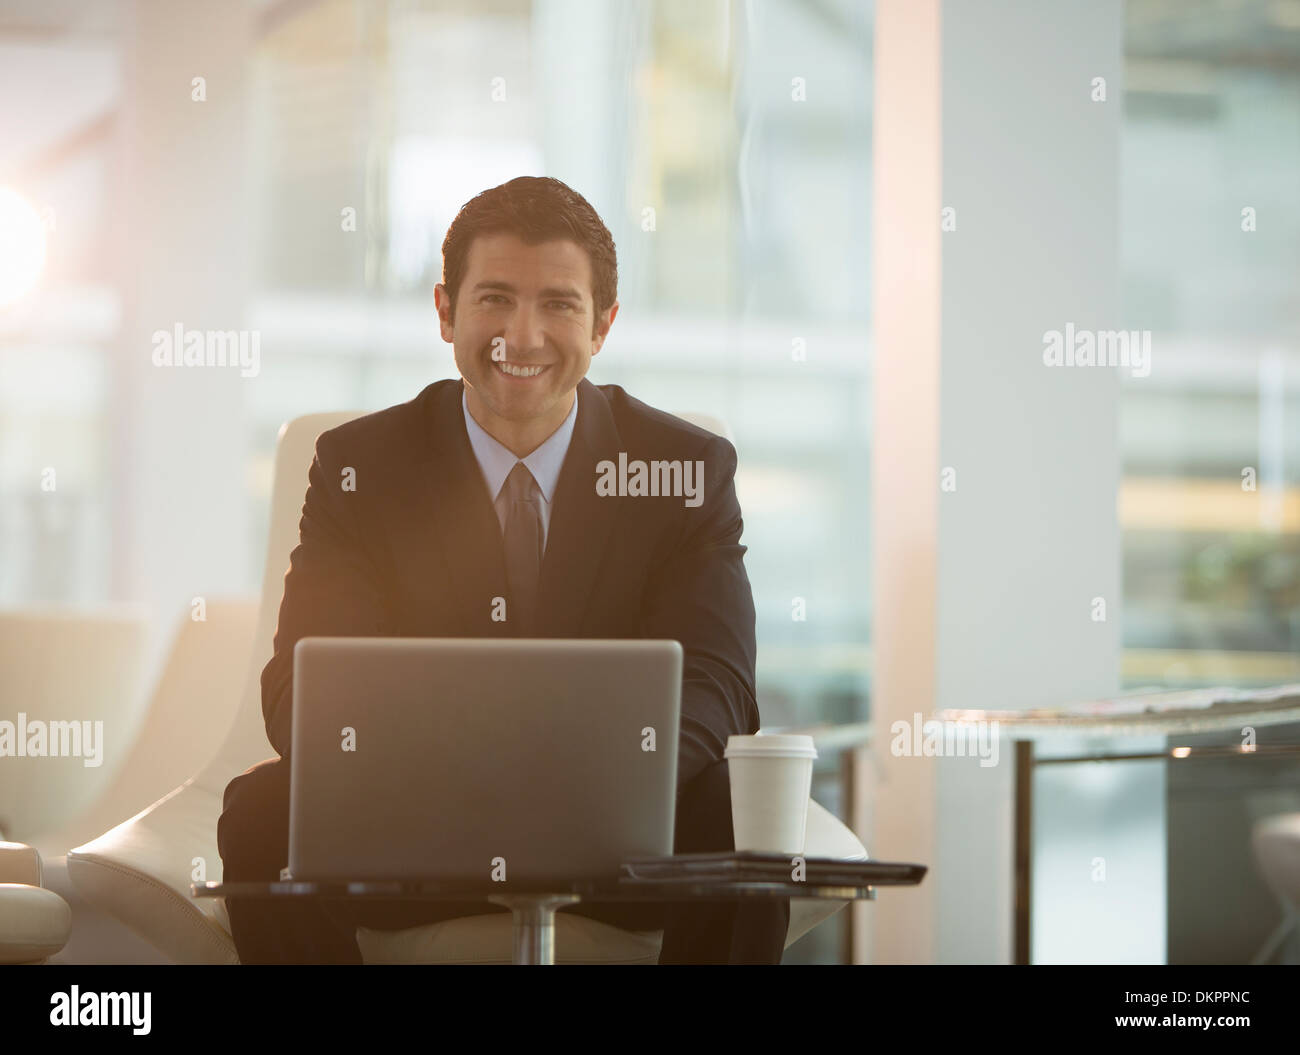 Businessman using laptop in office Stock Photo